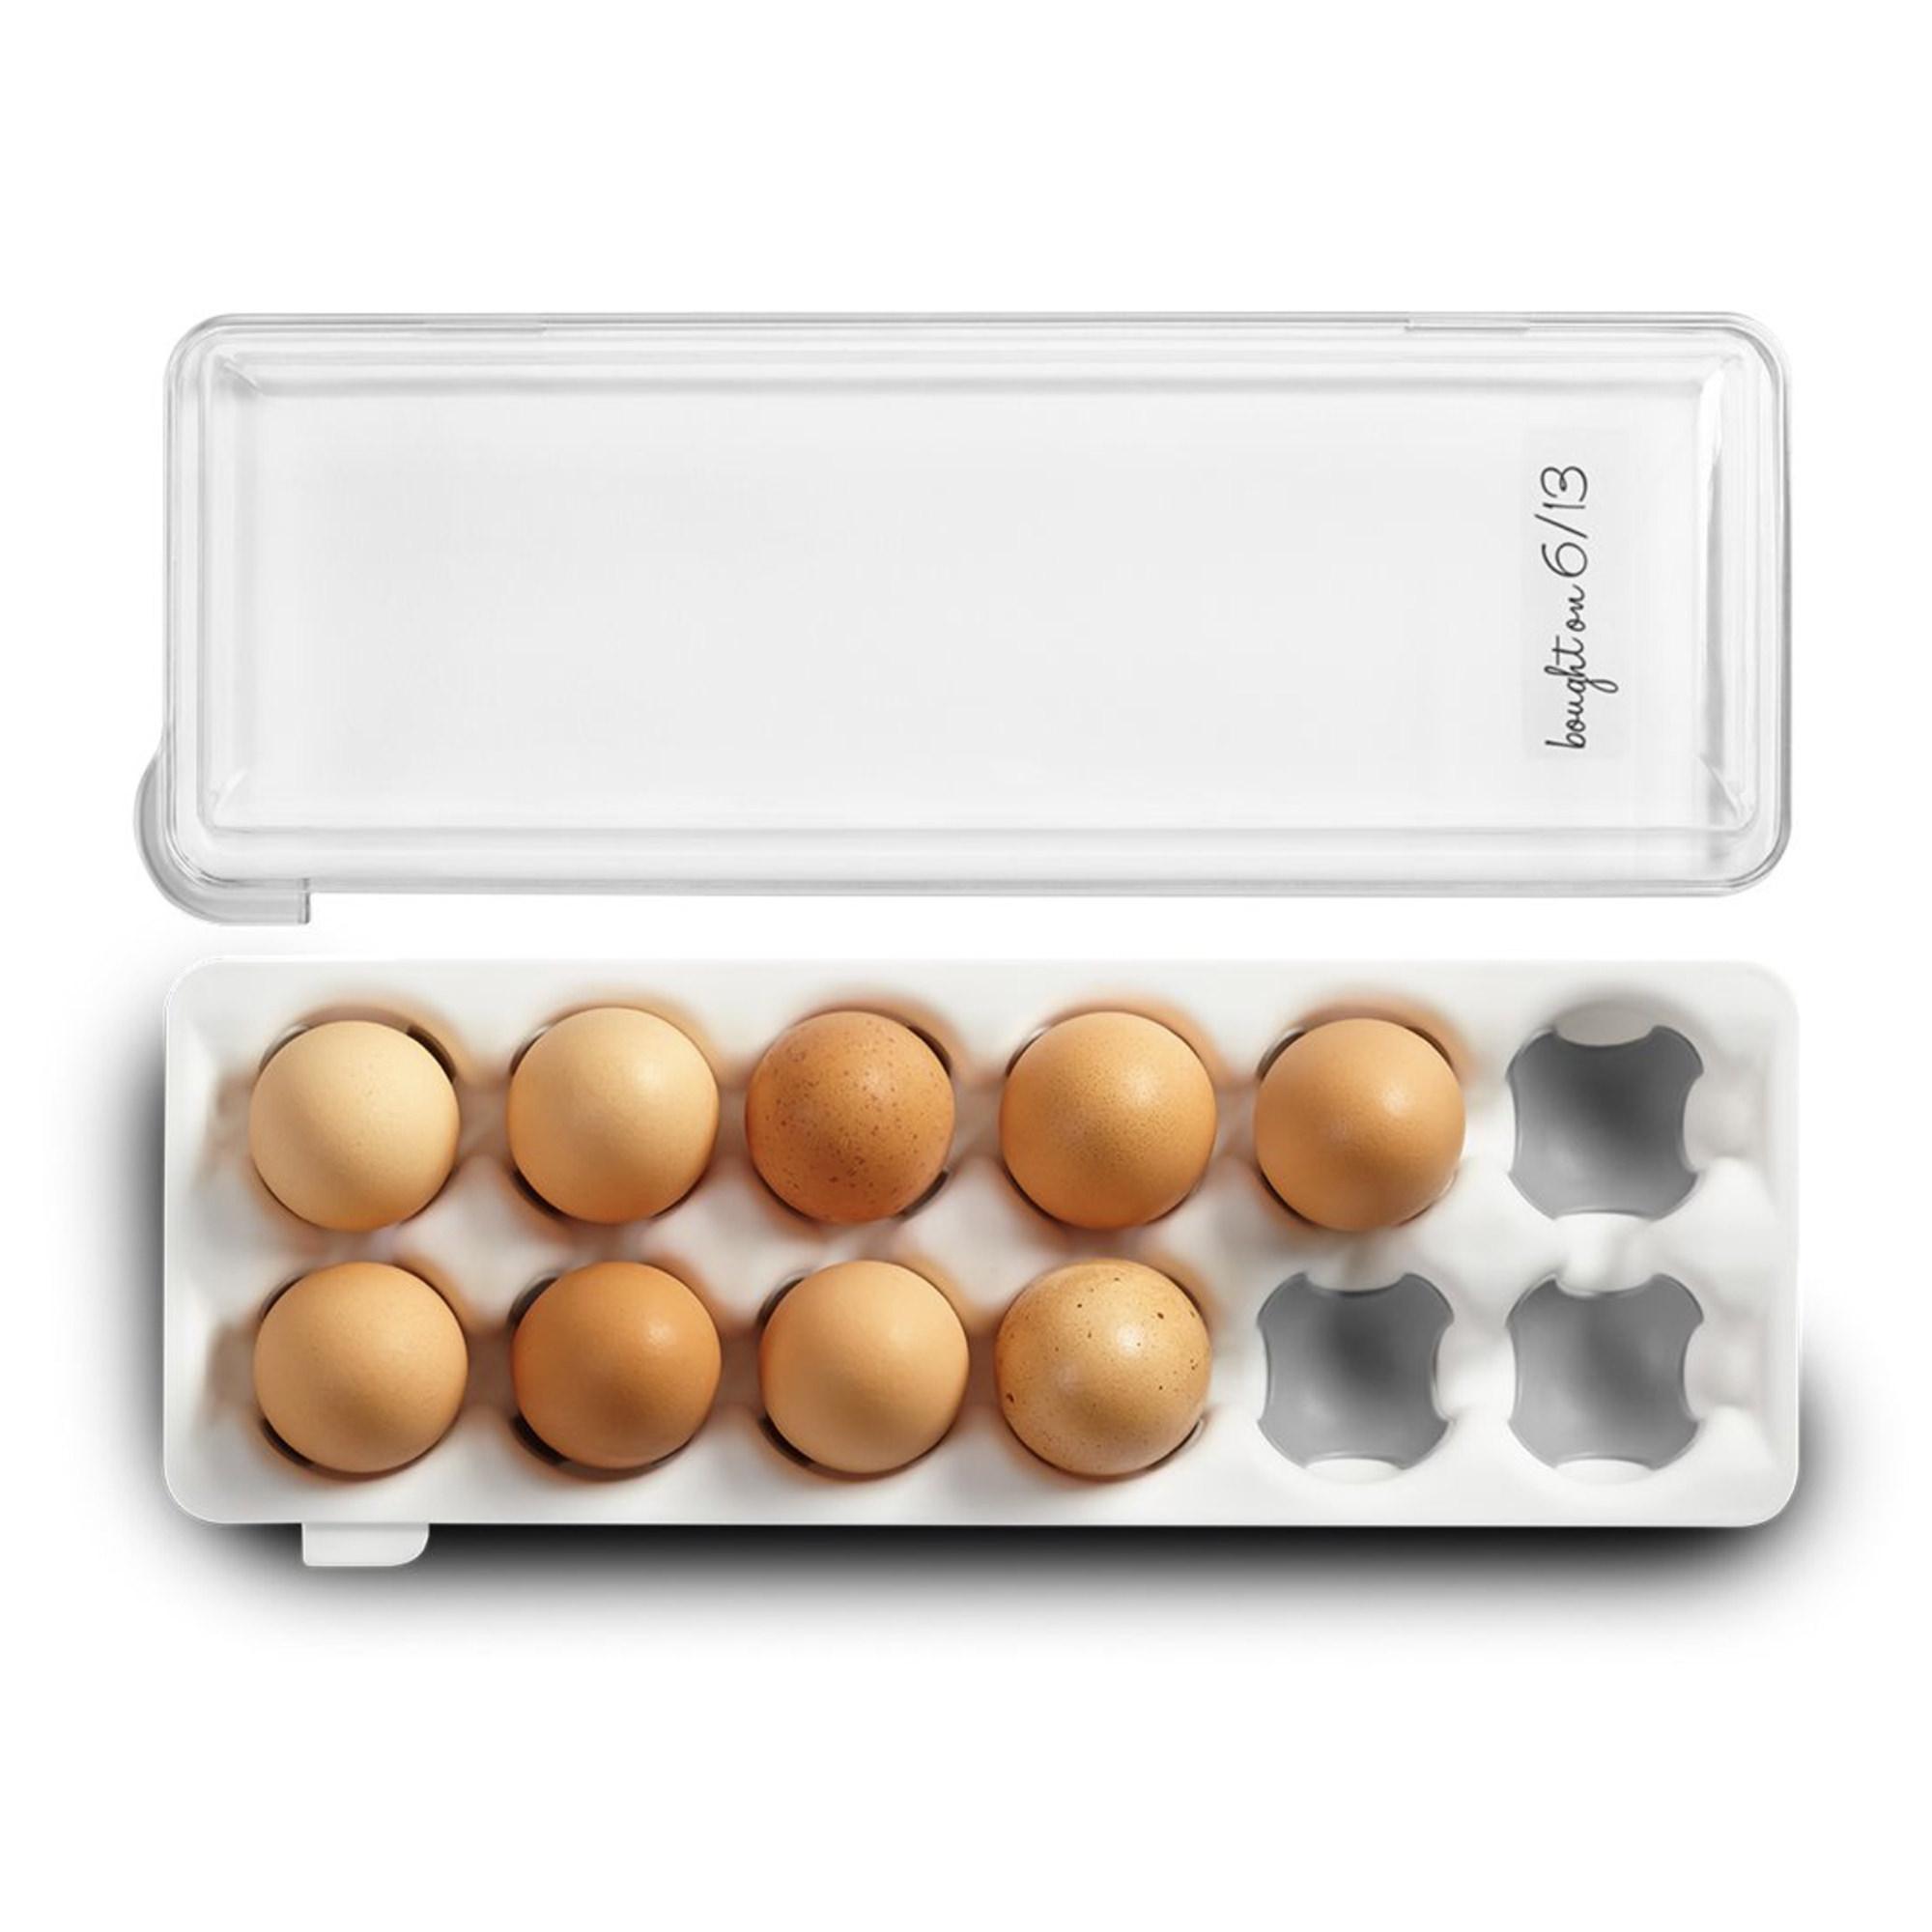 Madesmart Egg Holder with Snap on Lid Clear Image 3